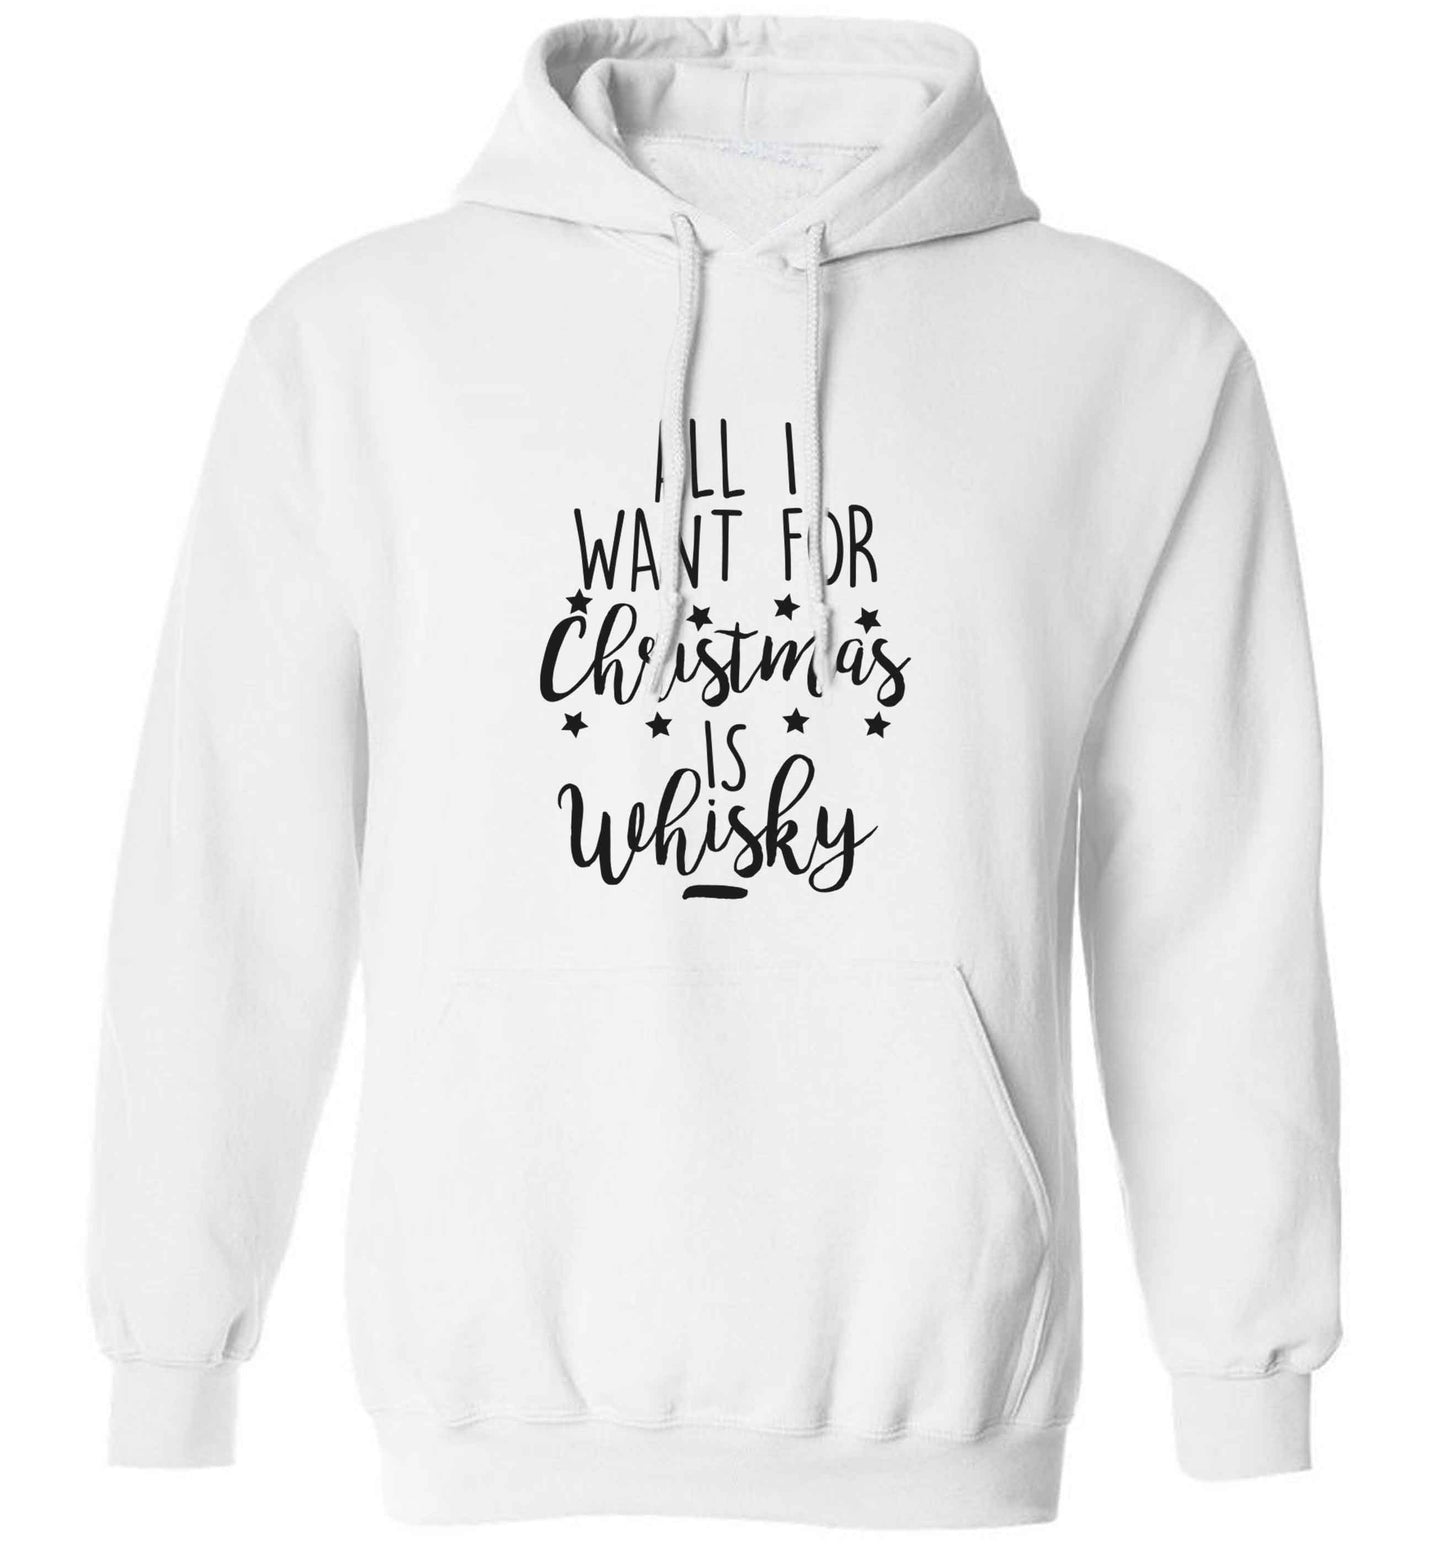 All I want for Christmas is whisky adults unisex white hoodie 2XL